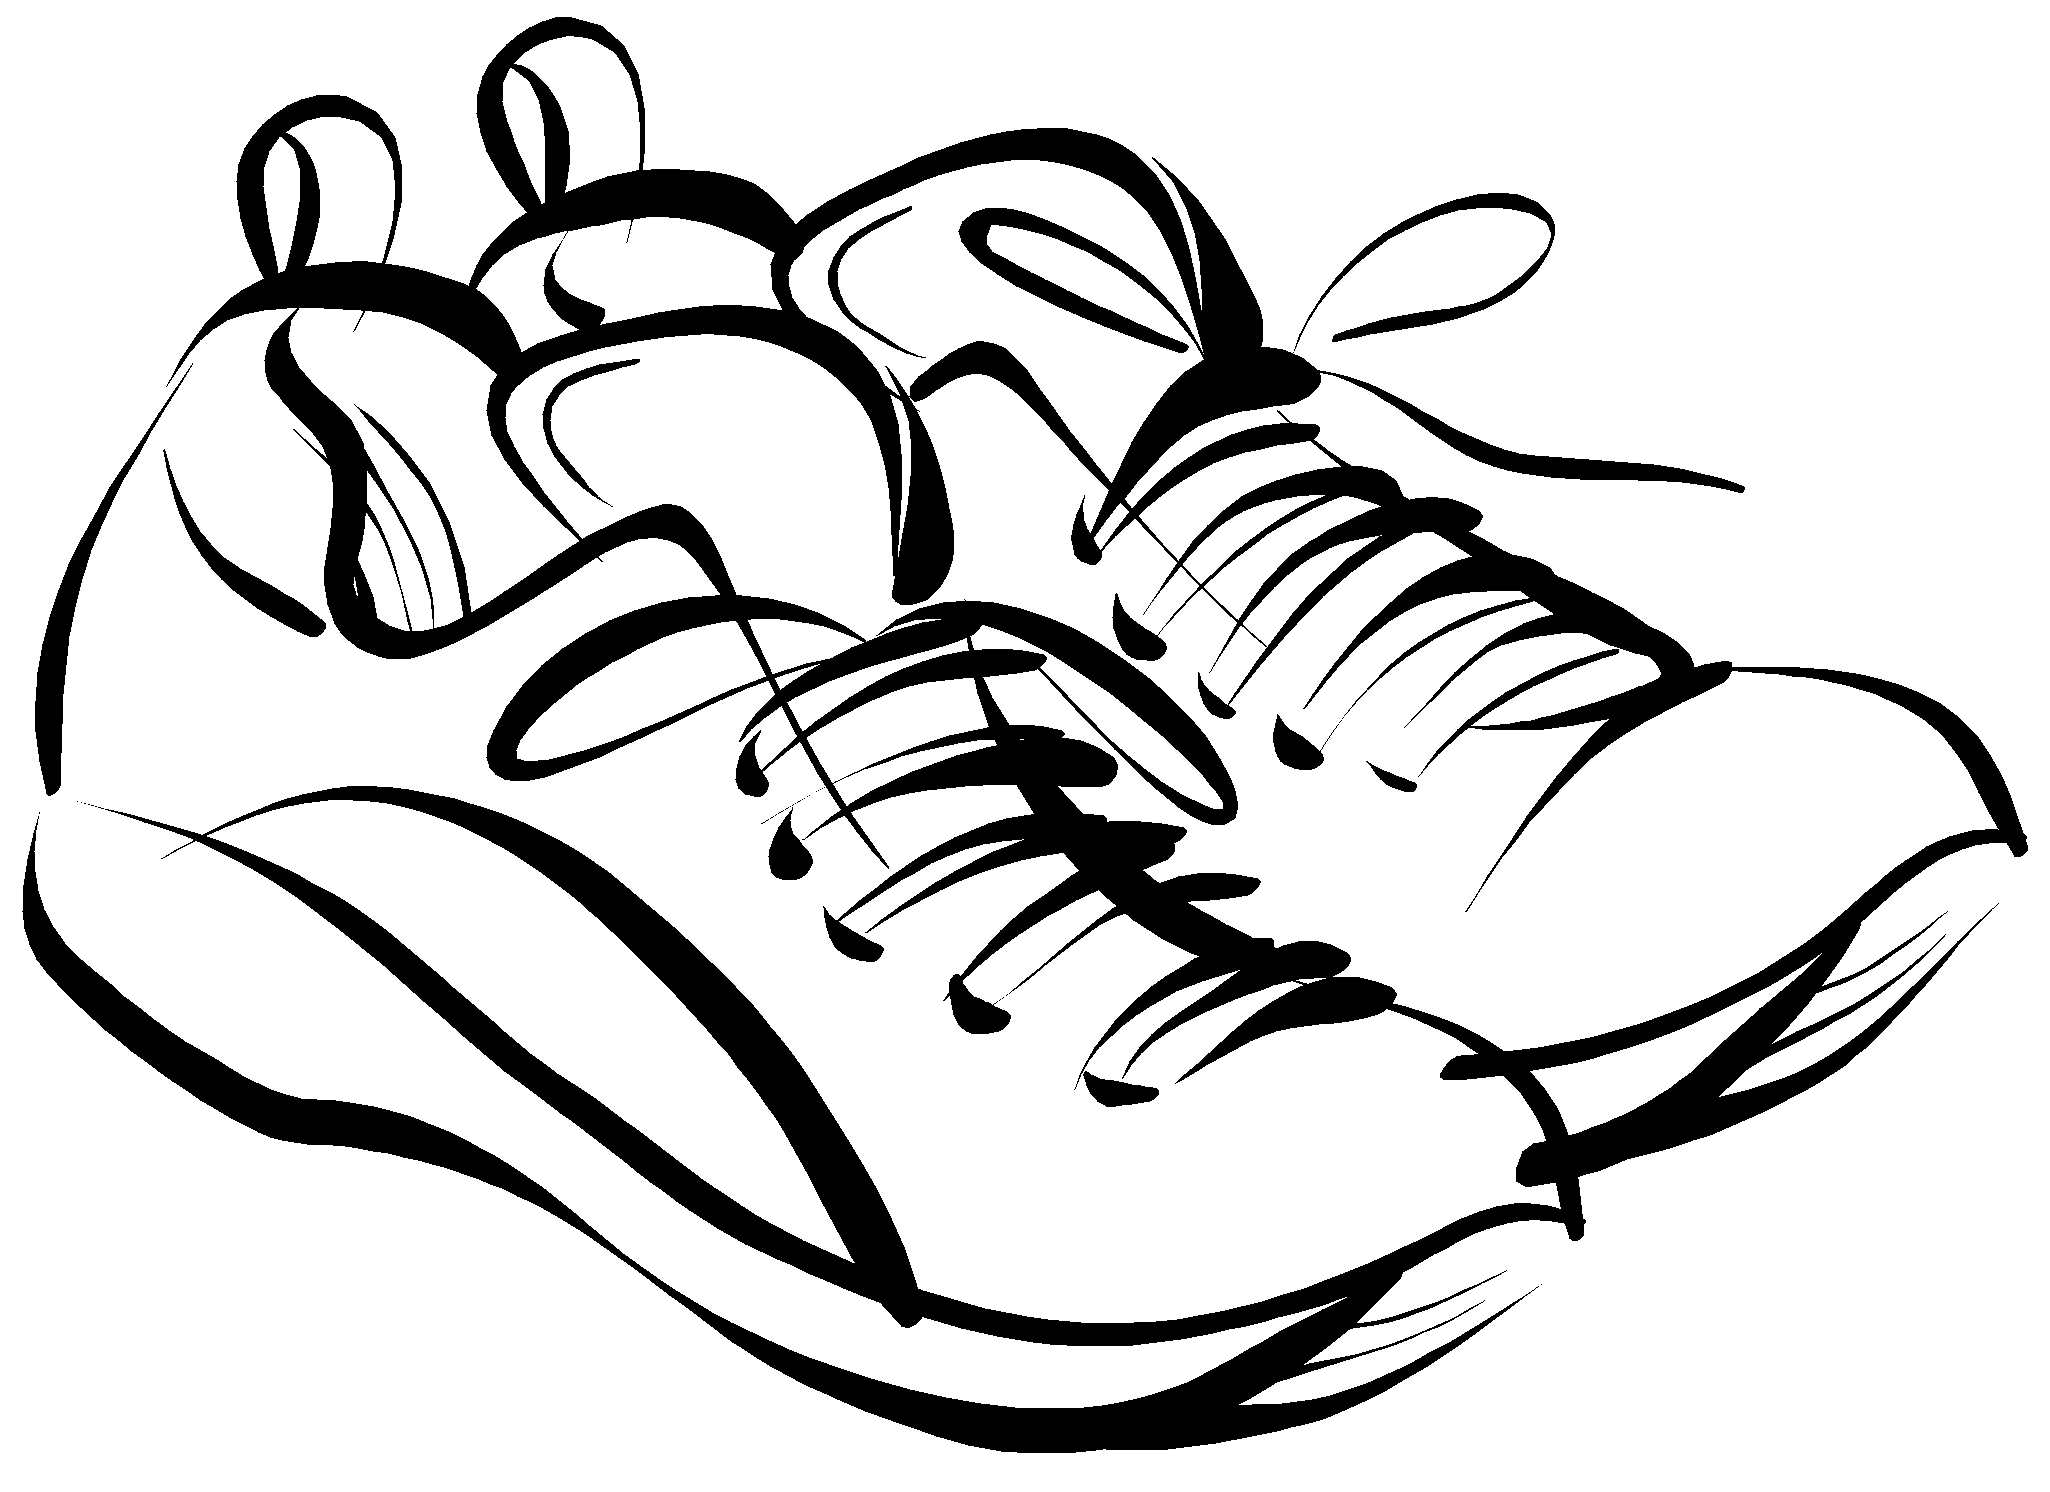 free black and white clip art shoes - photo #26